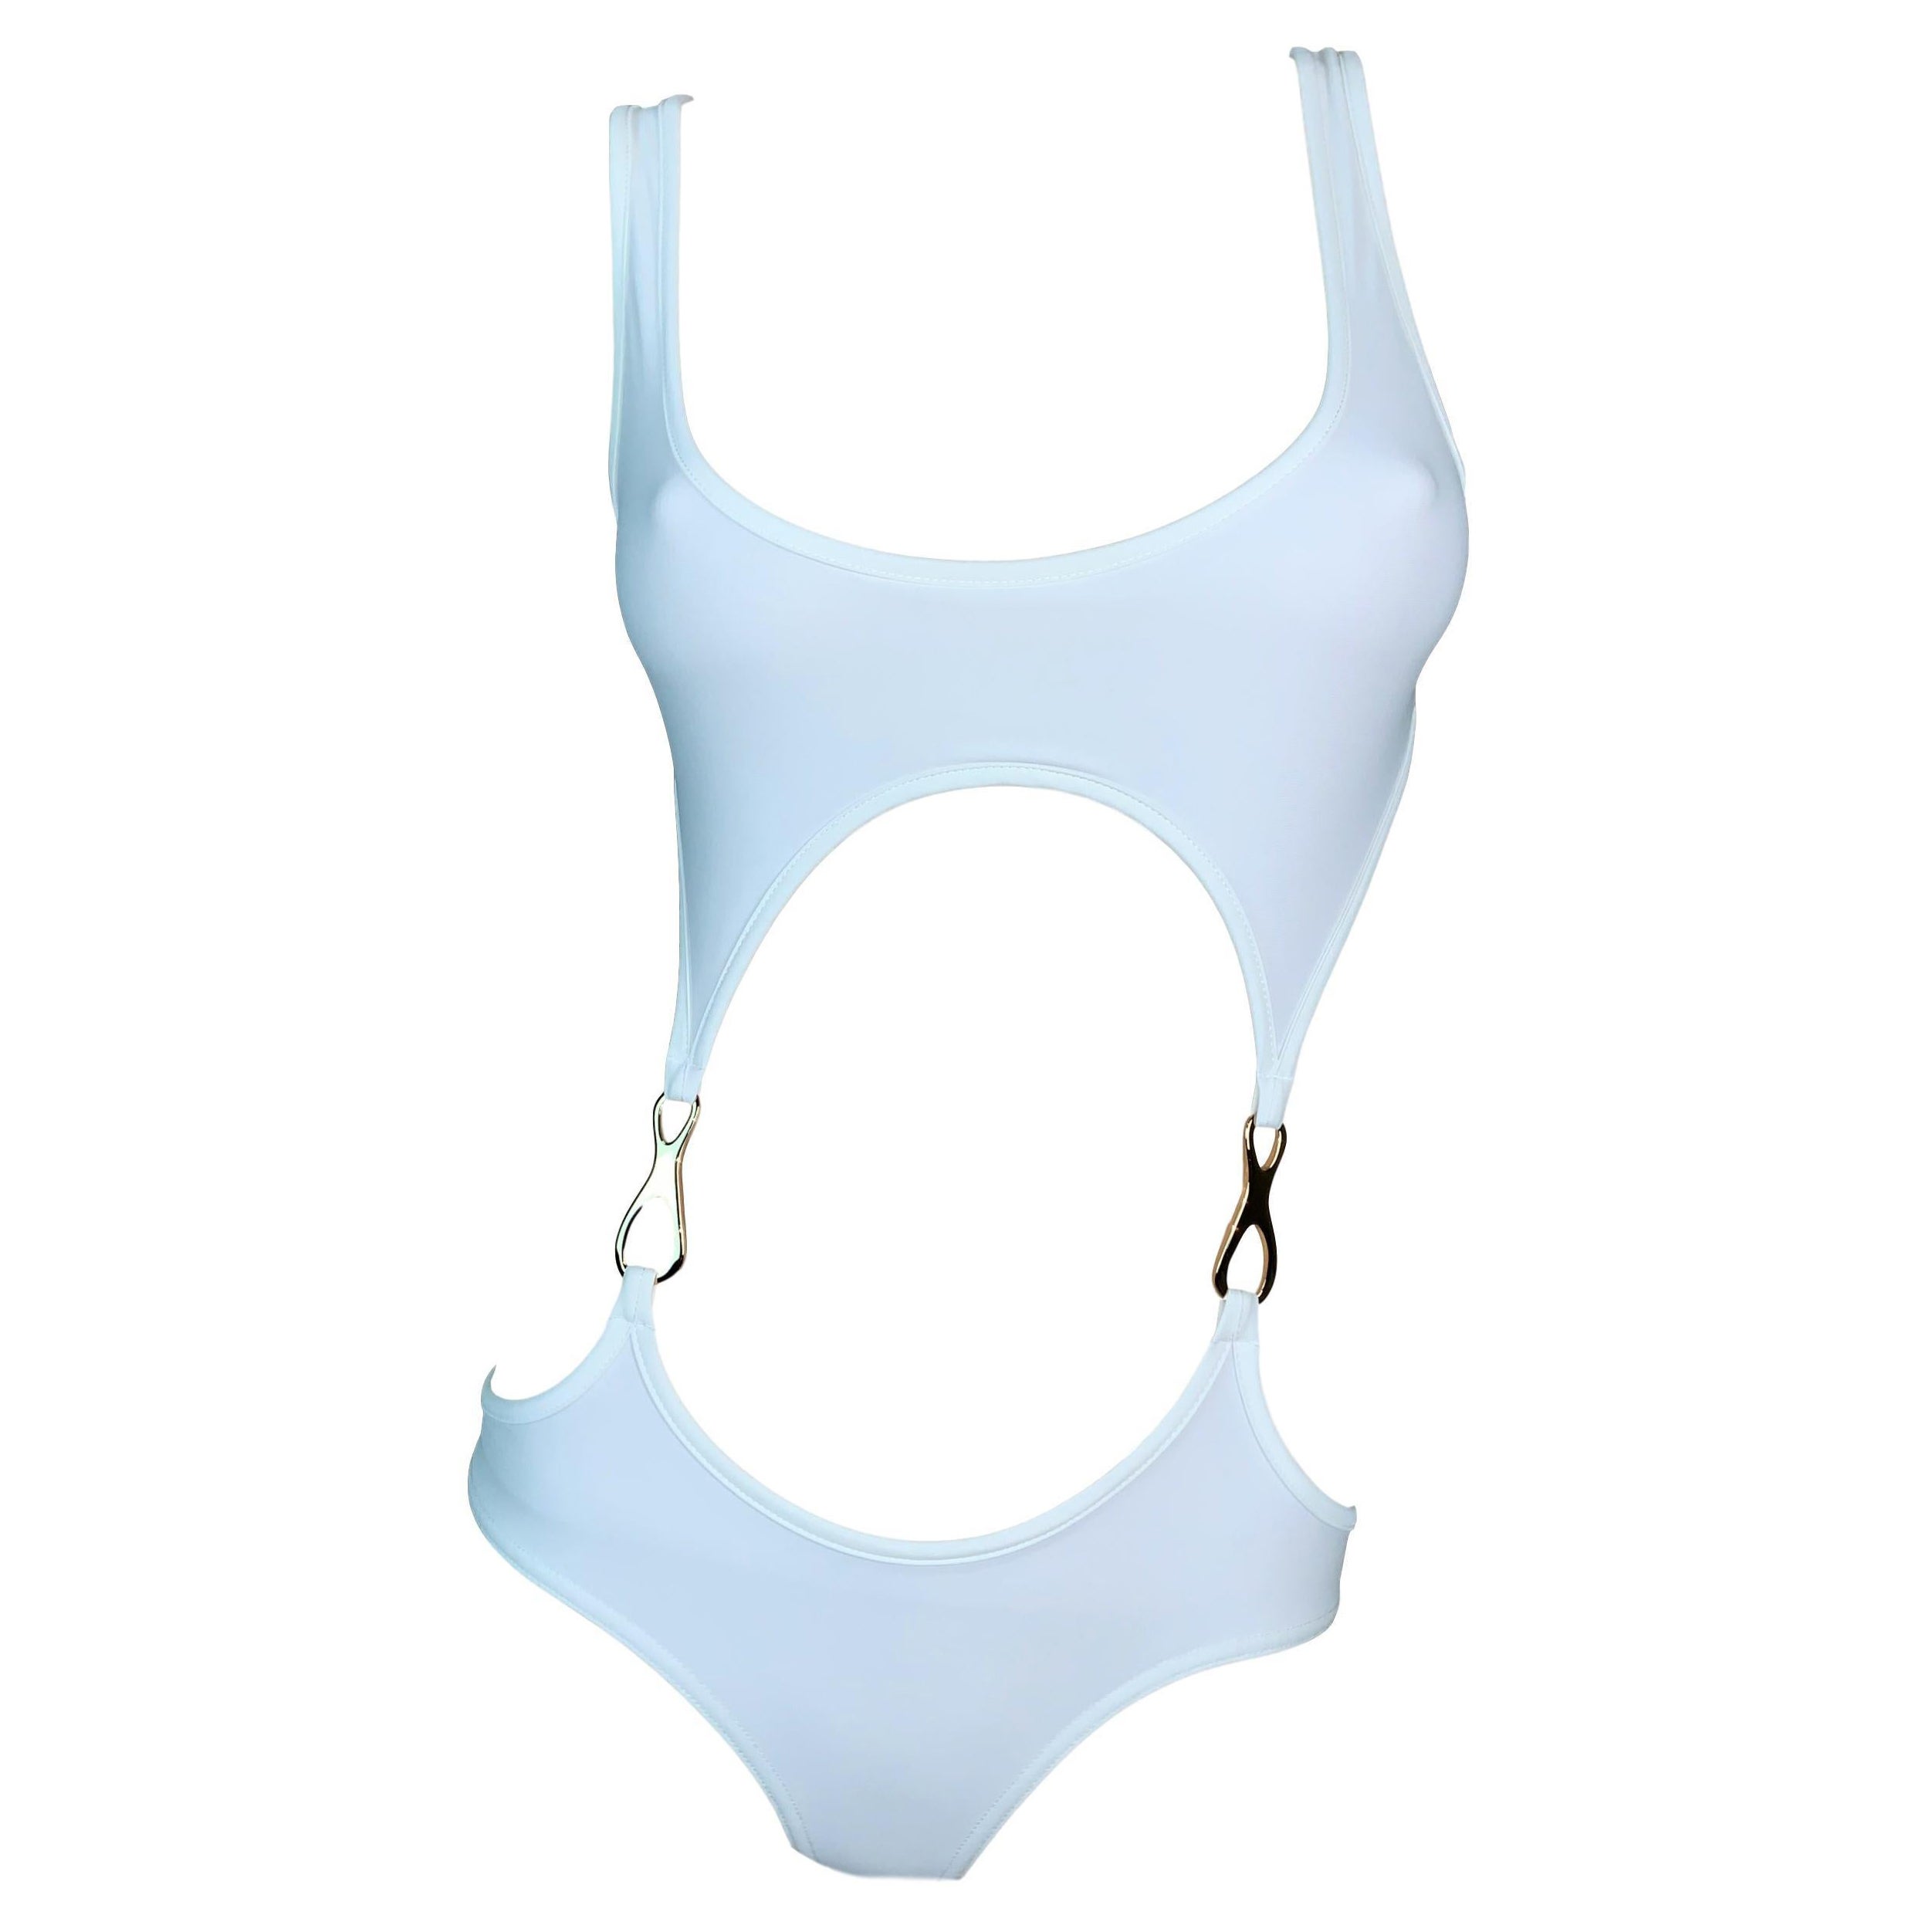 Vintage S/S 1998 Gucci Tom Ford White Cut-Out Gold Buckles Swimsuit